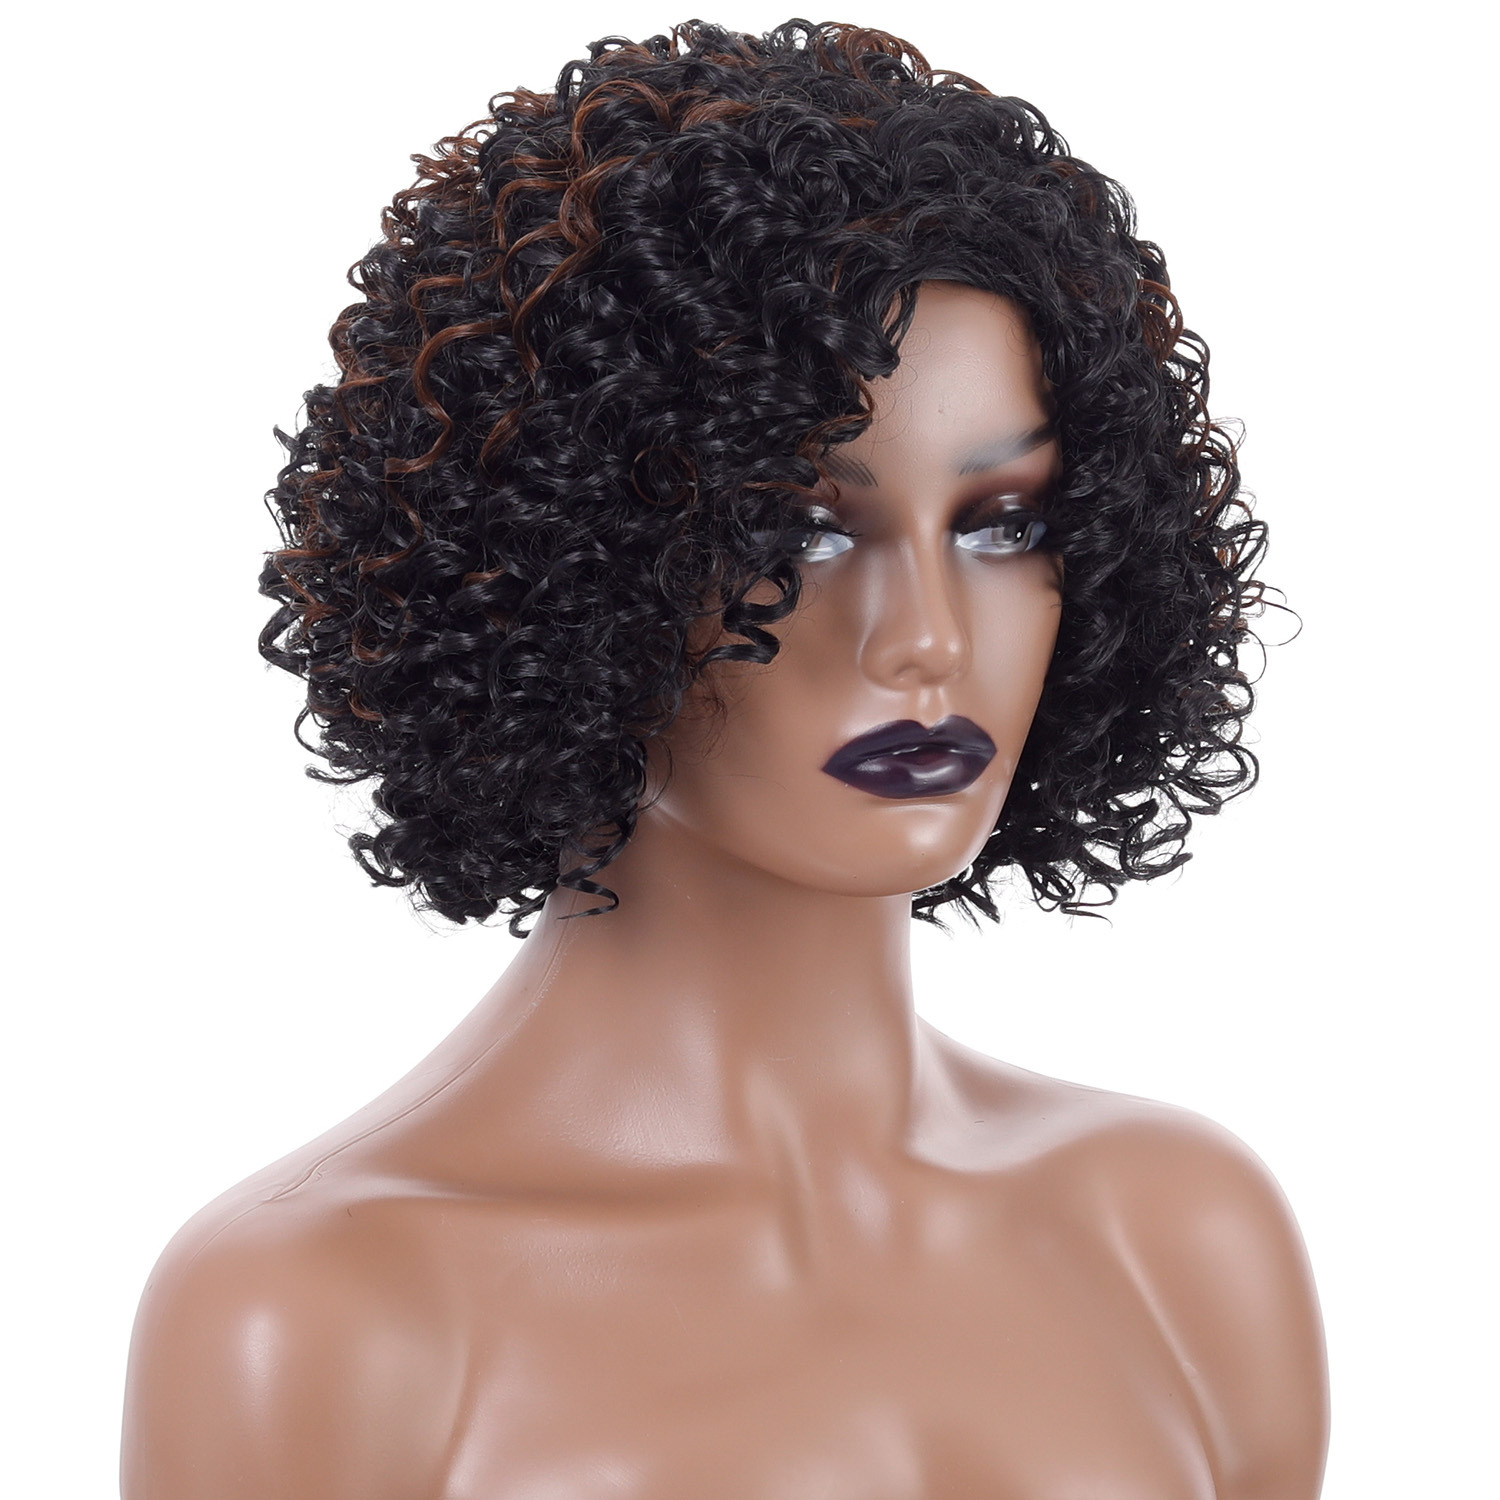 Fashionable short curly hair synthetic wig in black highlight brown color, with afro small curly wig headgear